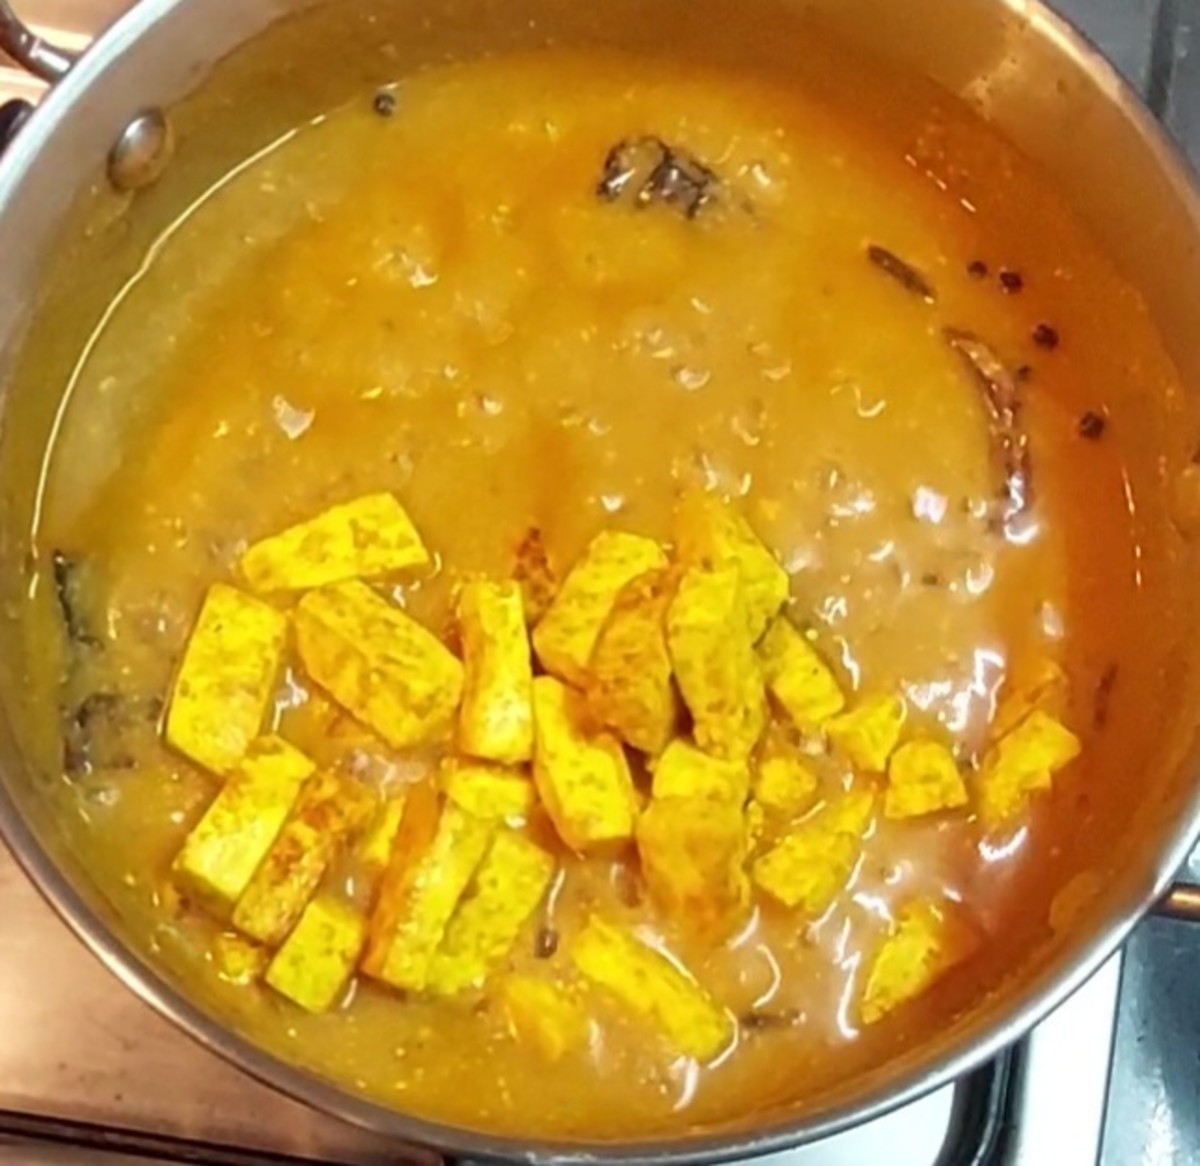 Spread the paneer over the pan and fry over low flame. Flip and fry on other side too. Fry for 5 minutes or till paneer turns golden brown. Switch off the flame. Add the fried paneer pieces to the gravy.